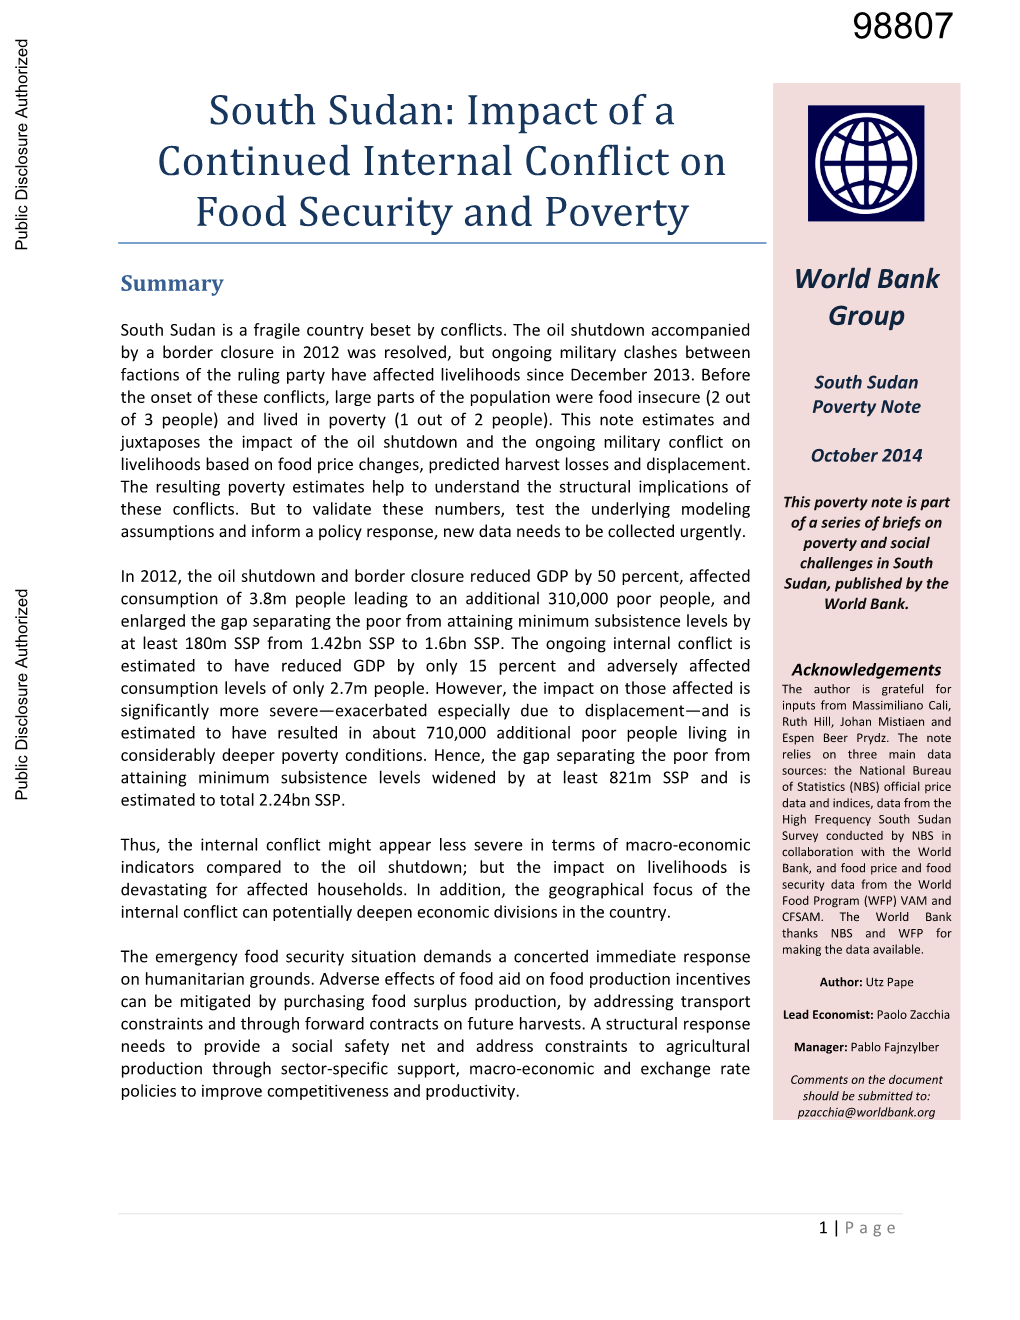 South Sudan: Impact of a Continued Internal Conflict on Food Security and Poverty